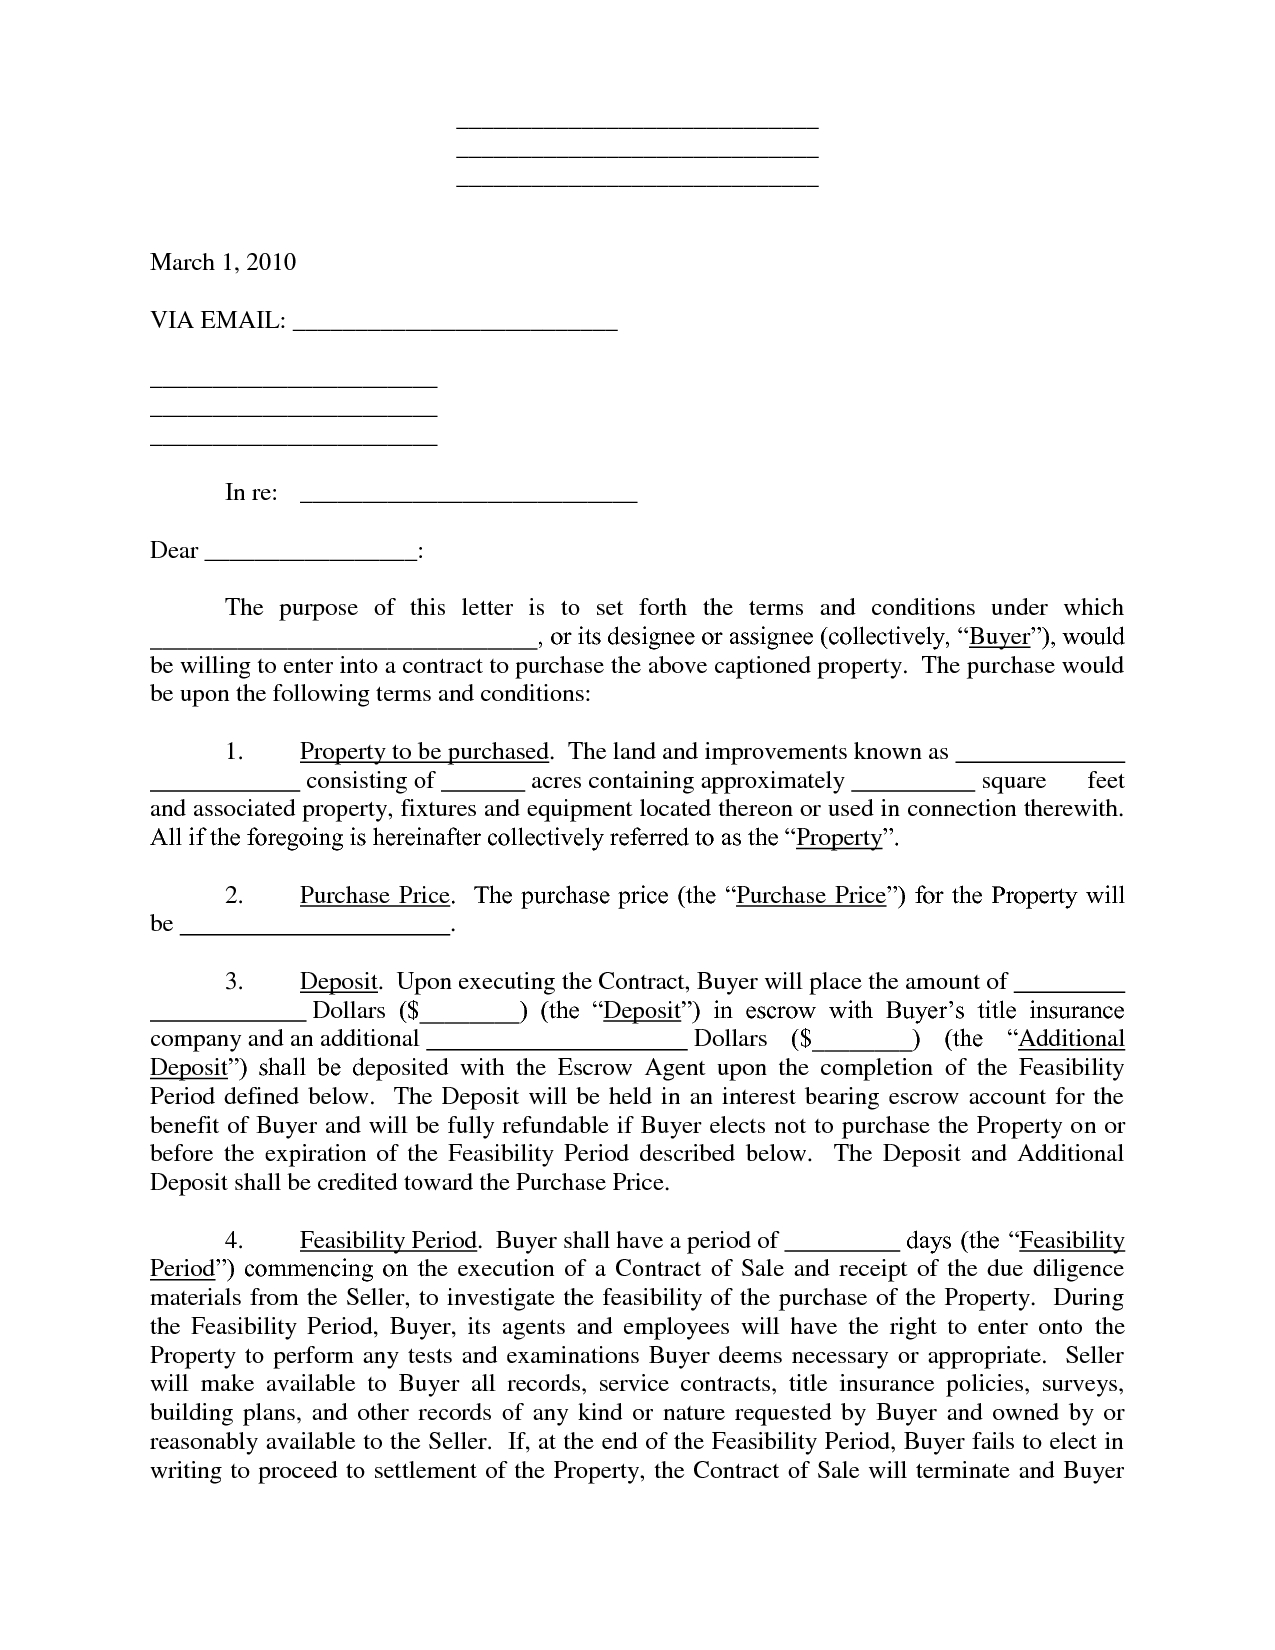 Letter Of Intent to Purchase Template - Free Printable Real Estate Purchase Agreement Sales Ideas Collection